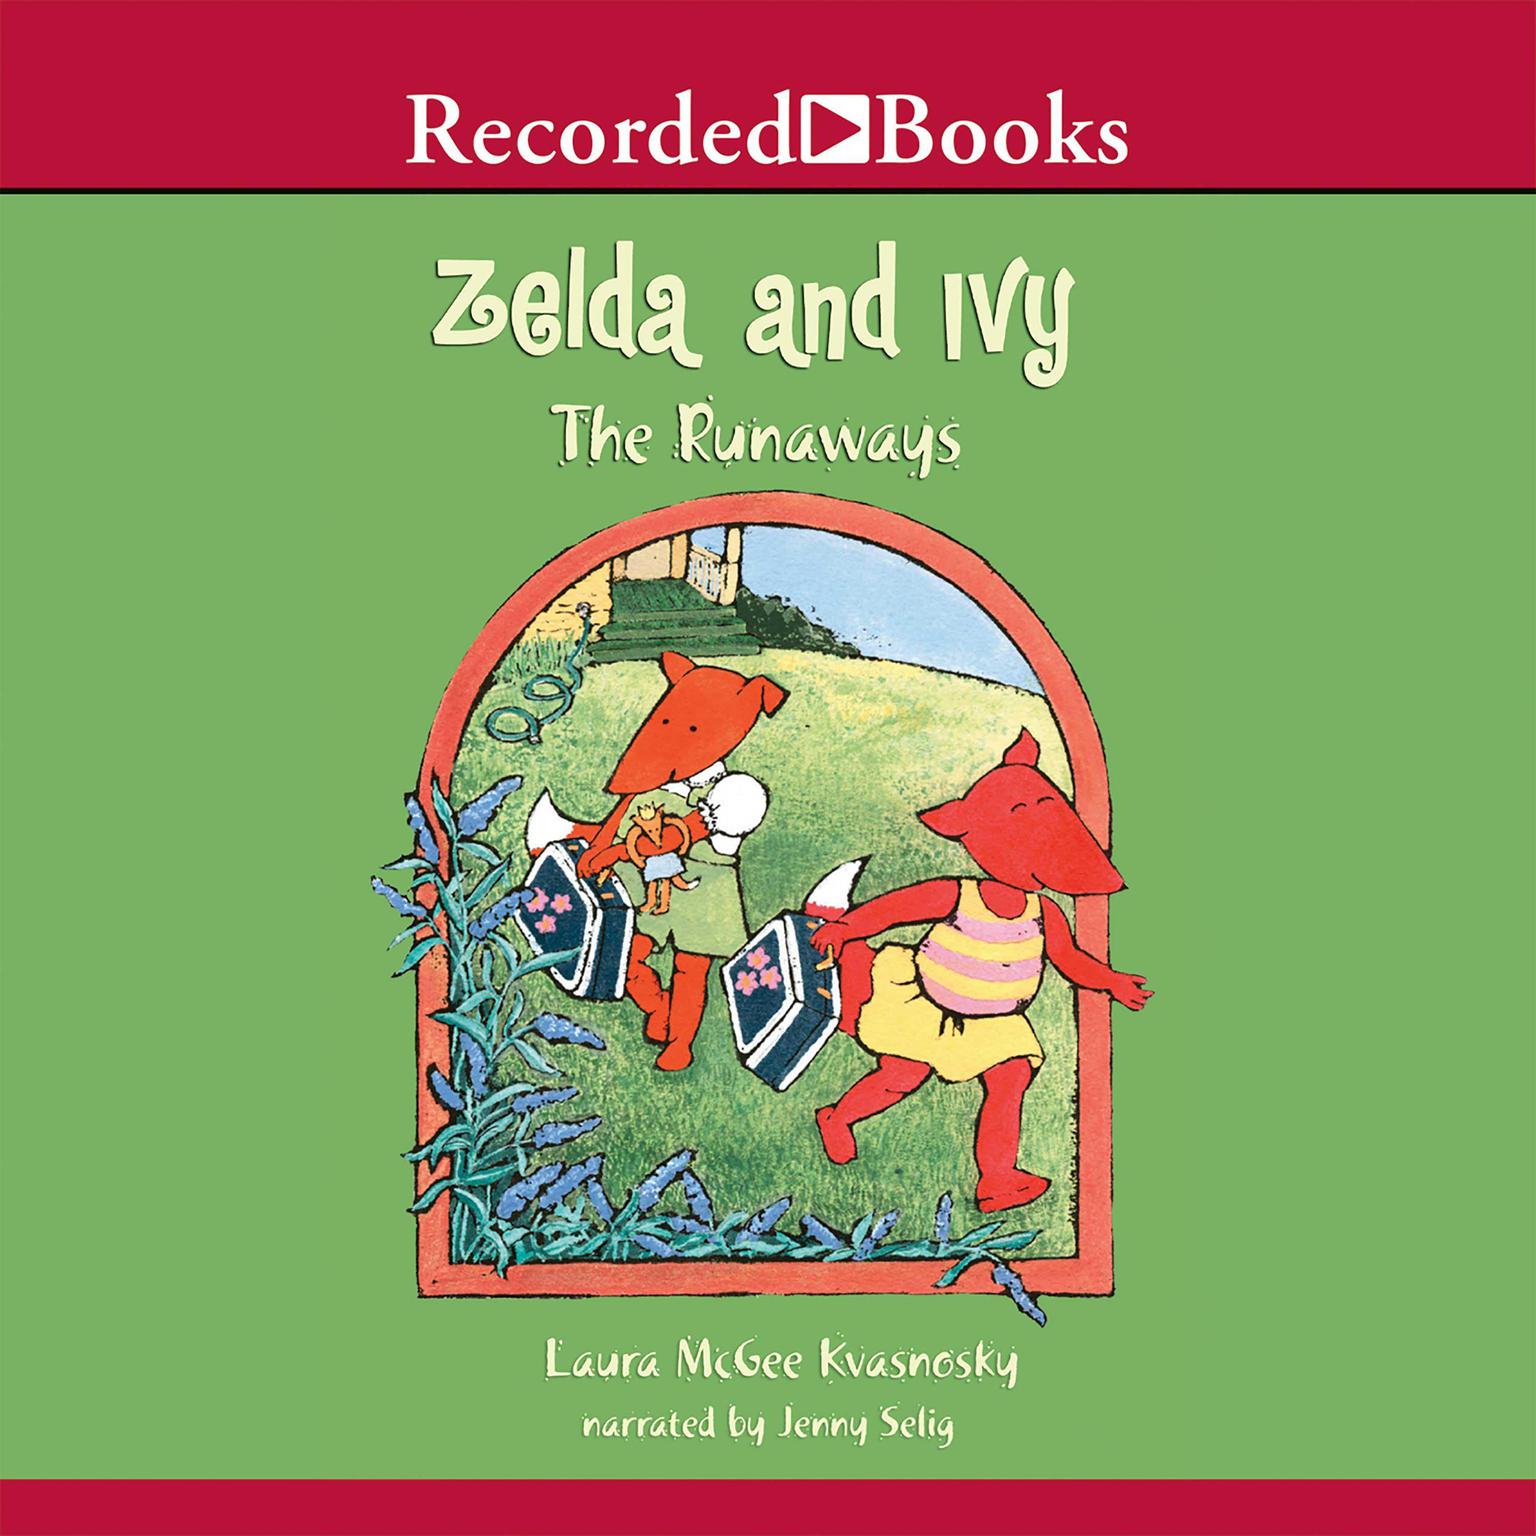 Zelda and Ivy: The Runaways Audiobook, by Laura McGee Kvasnosky